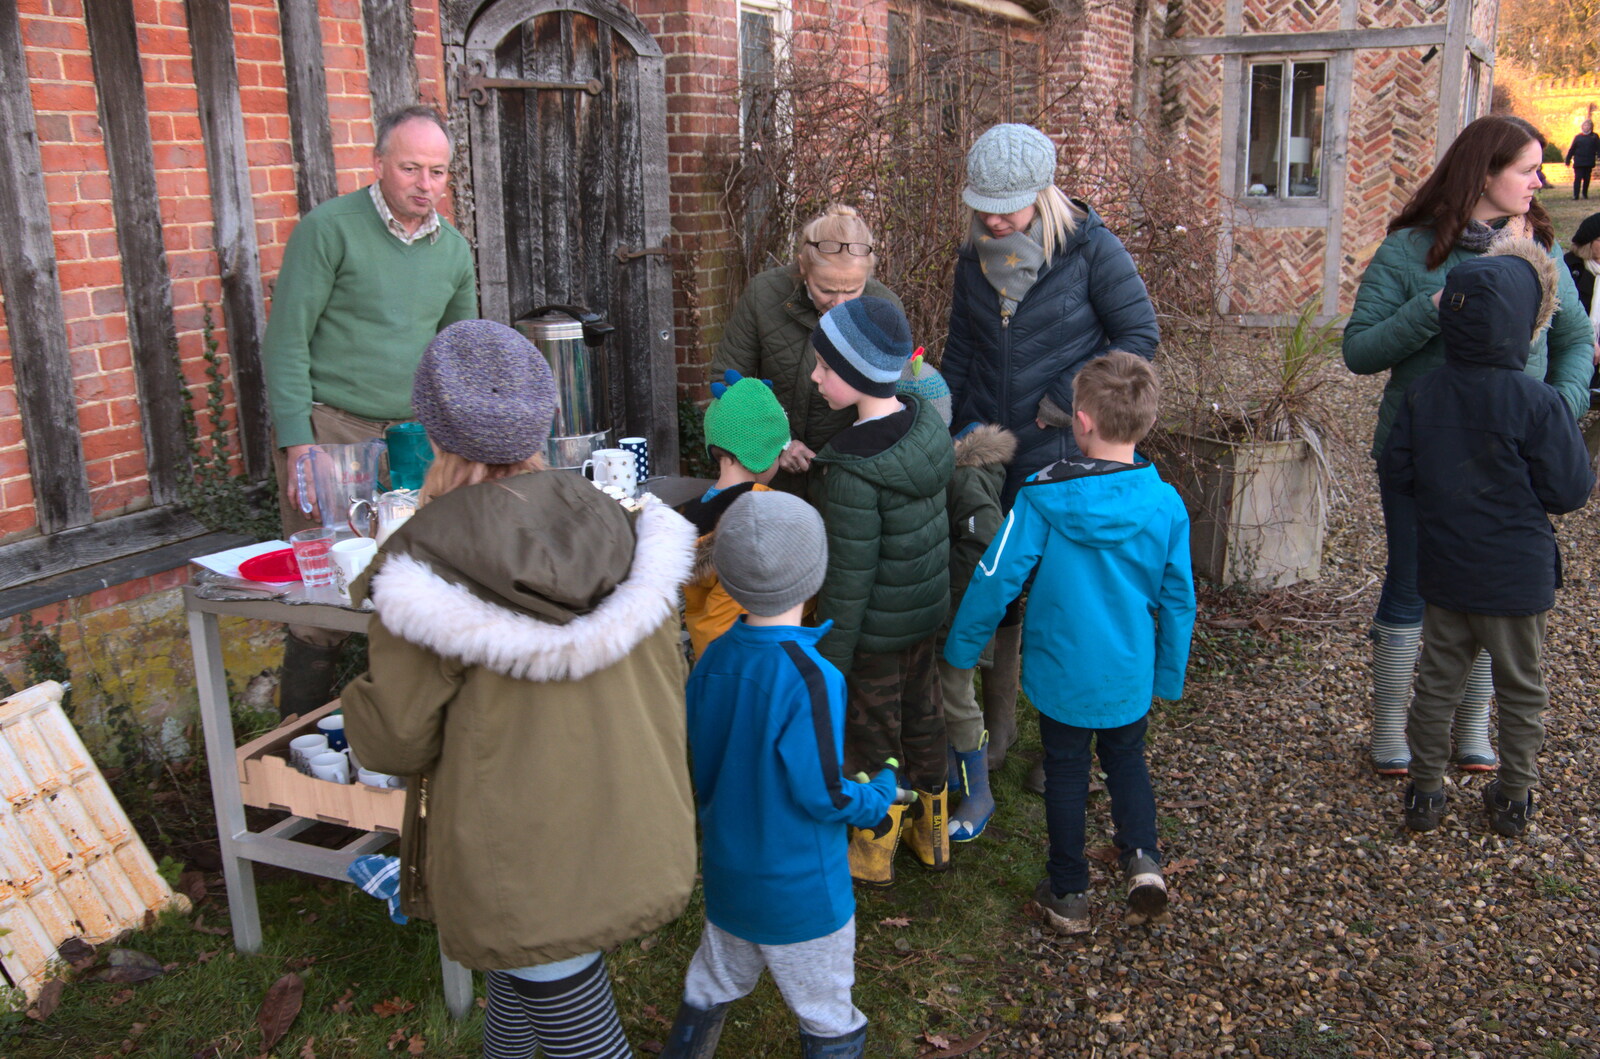 The lord of the manor provides tea and biscuits from Snowdrops at Talconeston Hall, Tacolneston, Norfolk - 7th February 2020